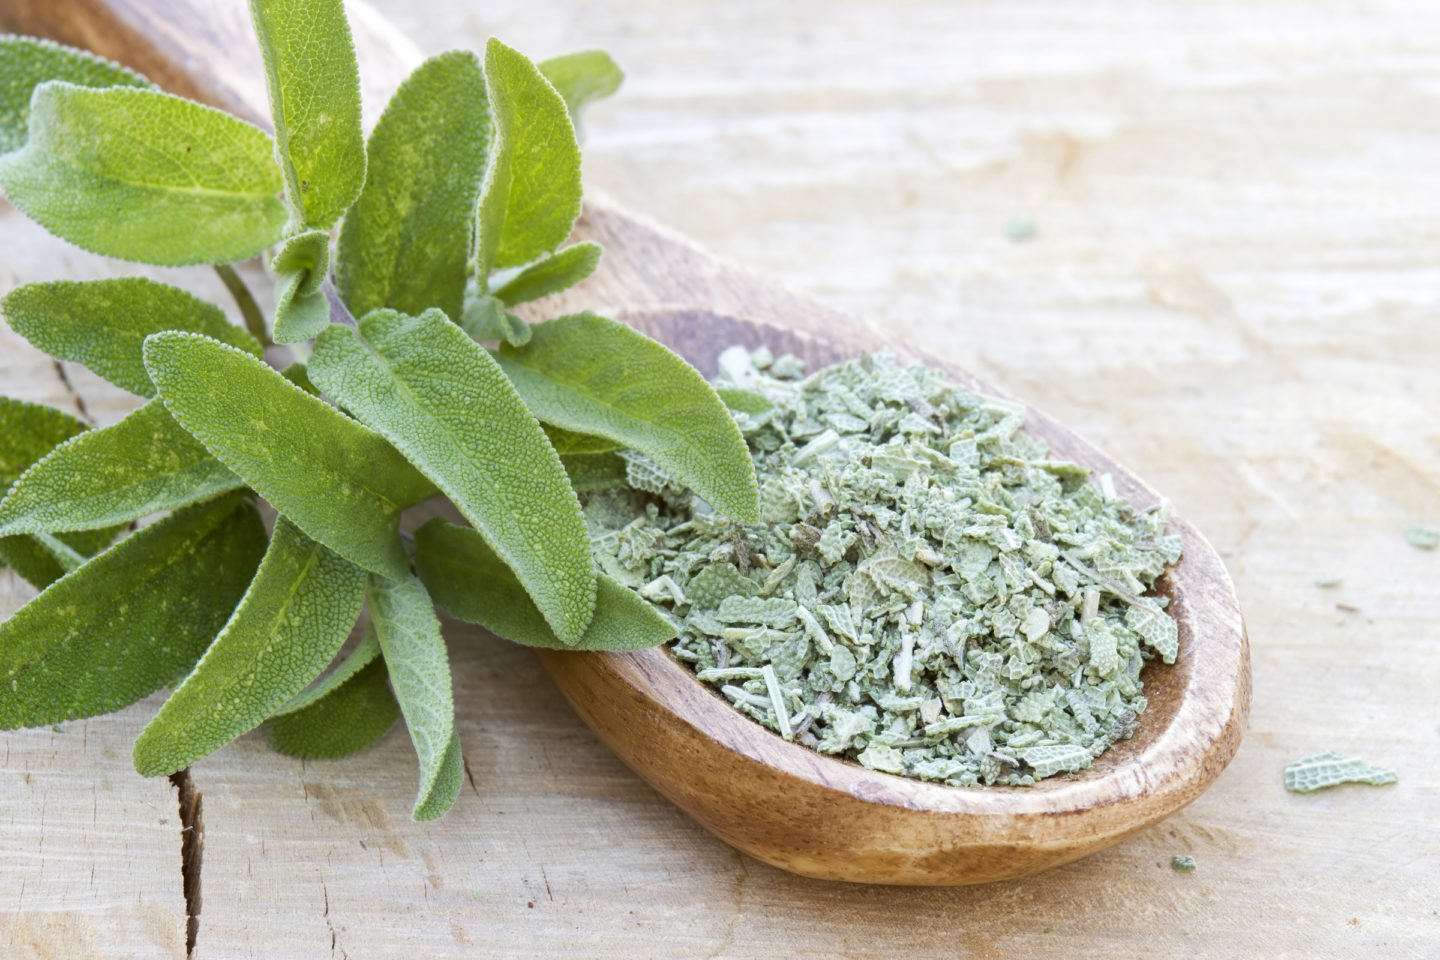 sage is a good thyme substitute